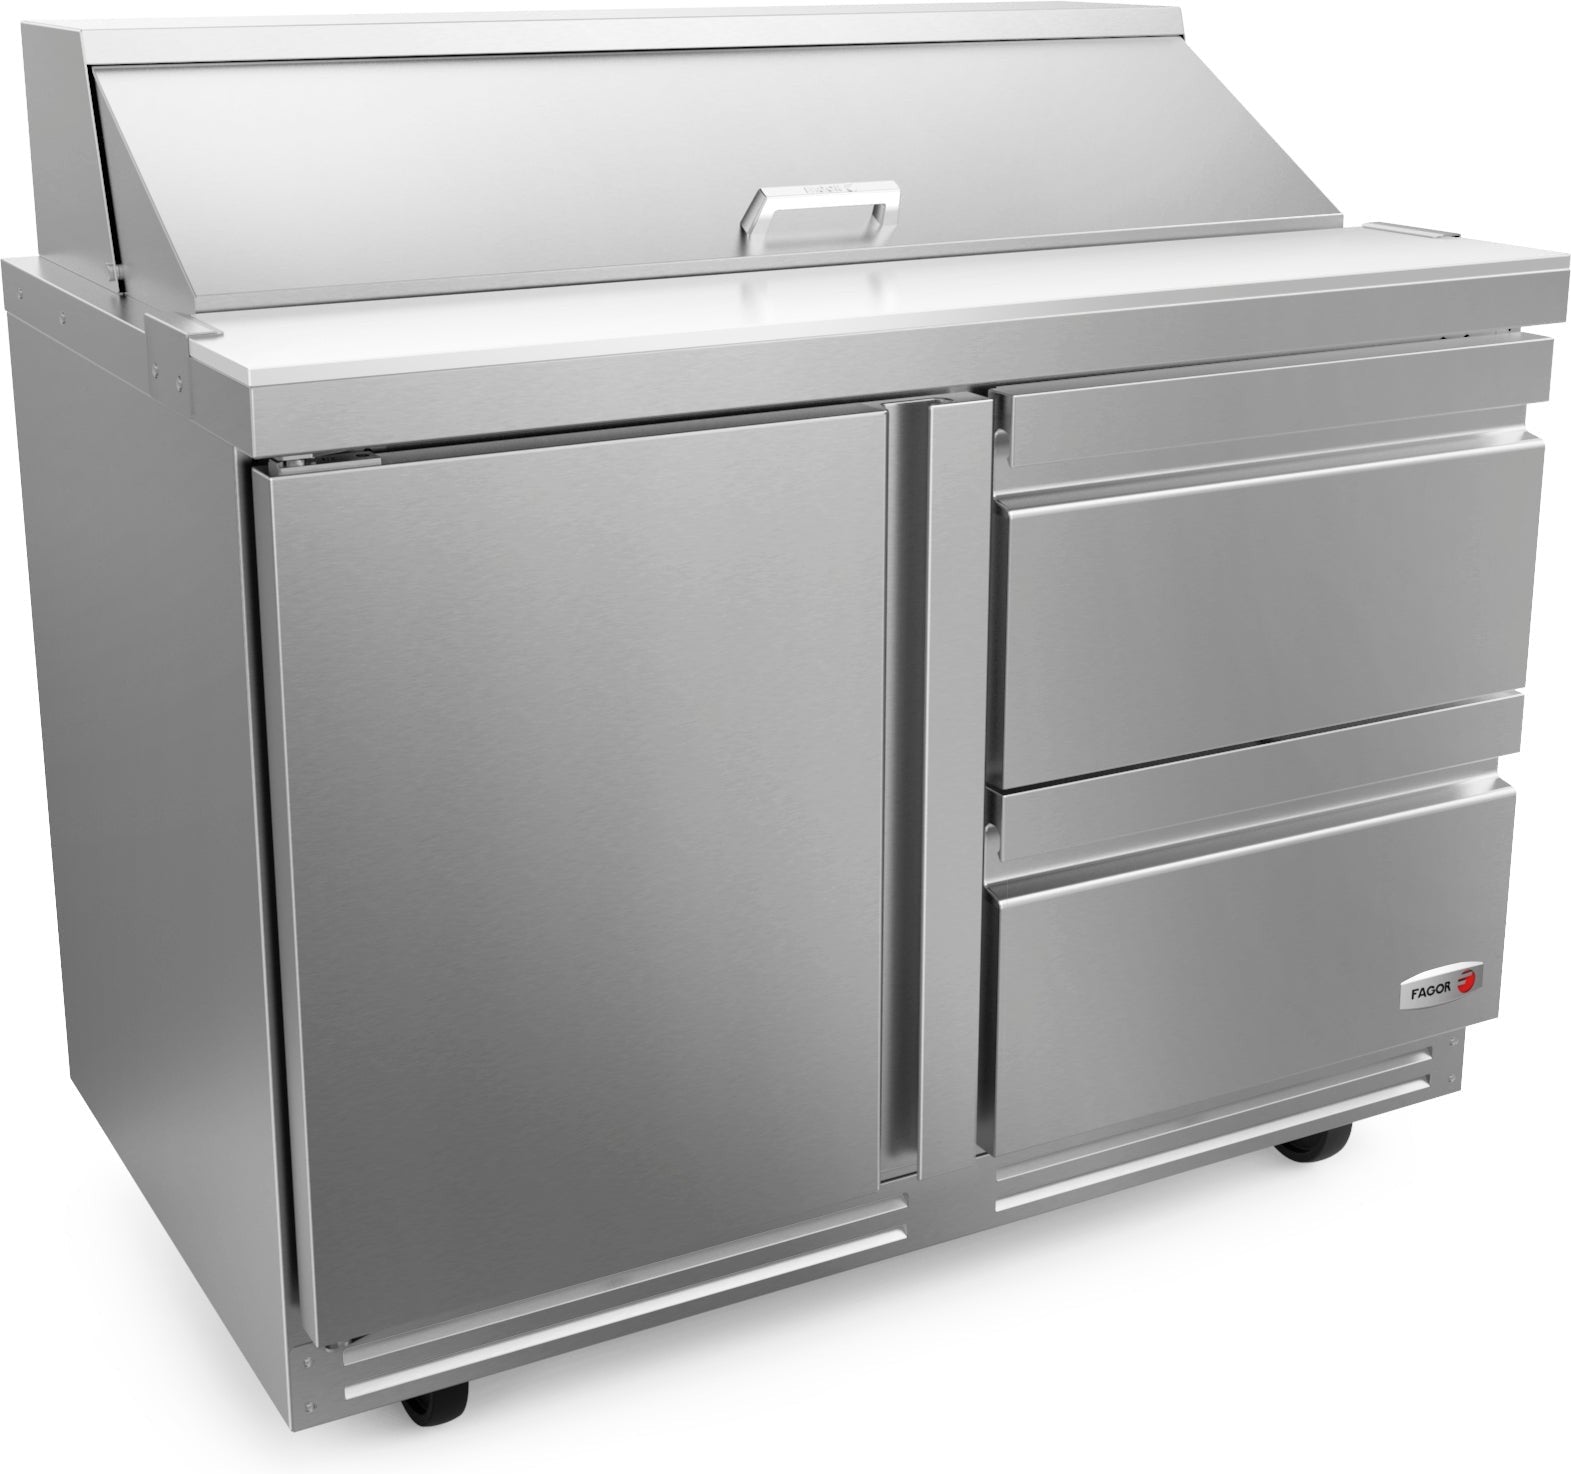 Fagor - FMT Series 115 V, 60" Single Door Mega Top Refrigerated Salad/Sandwich Prep Table With Two Drawer - FMT-60-24-D2-N